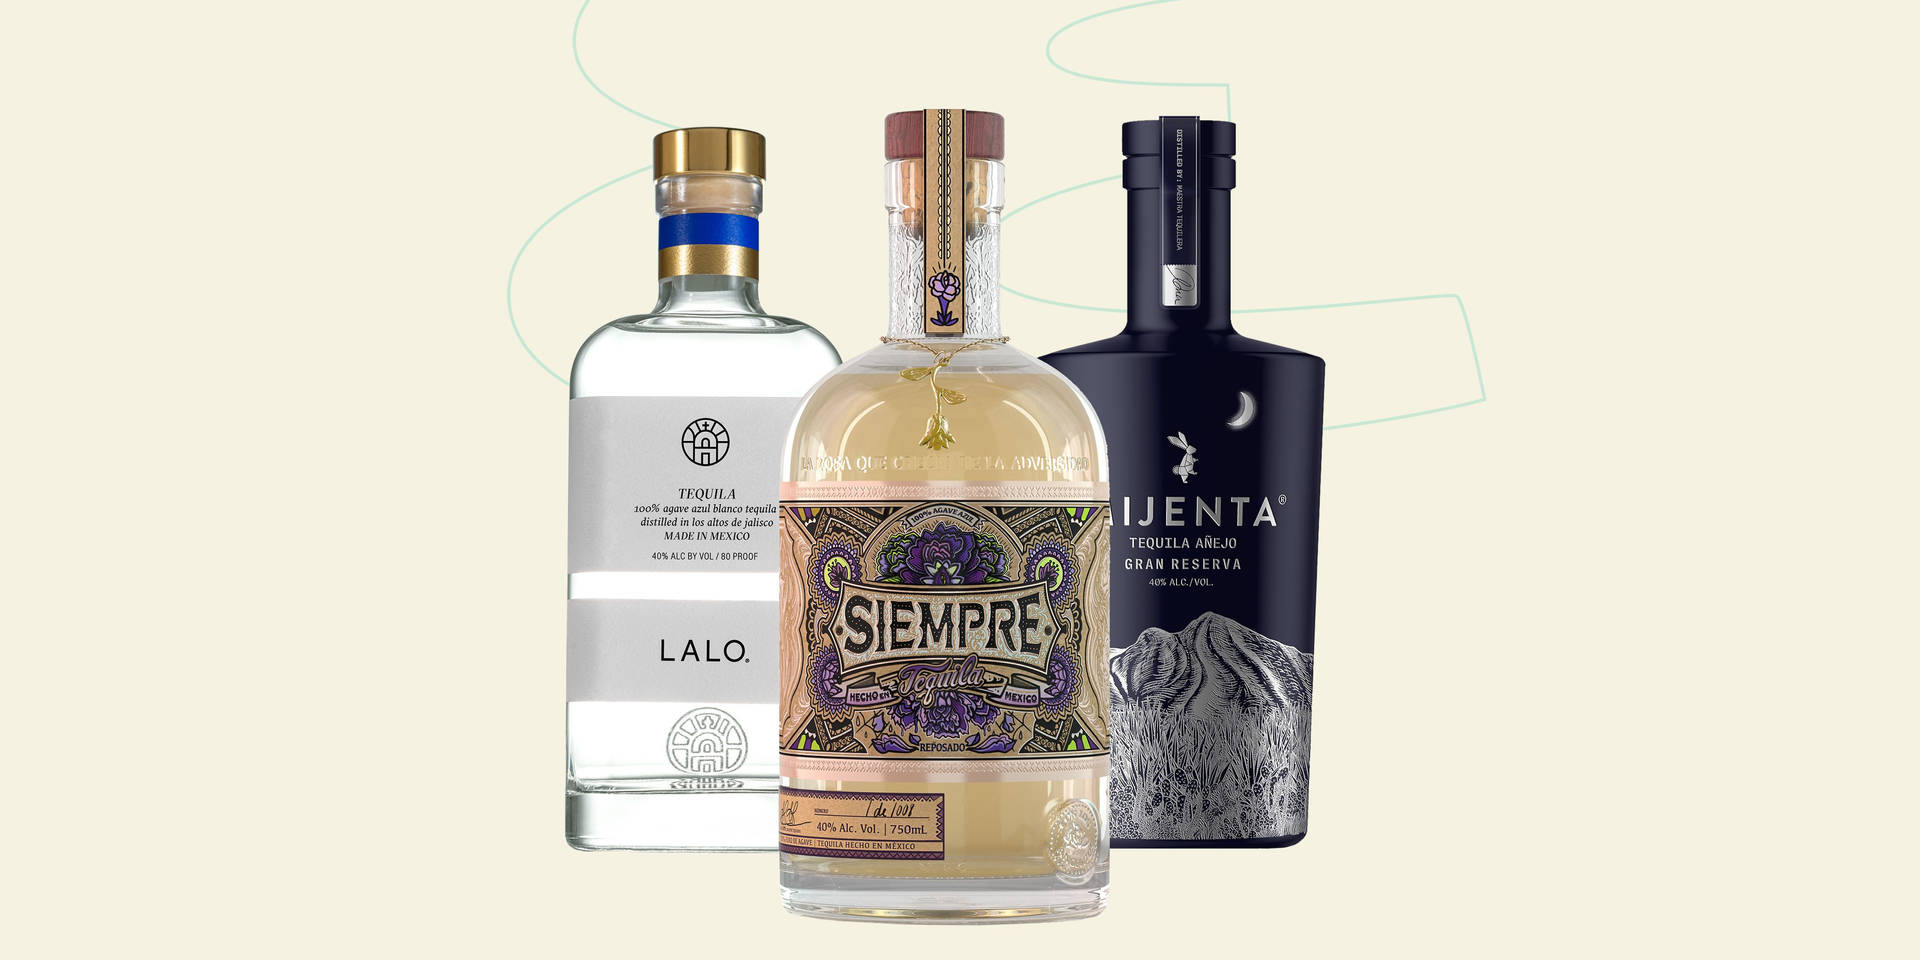 Luxurious Lalo Tequila presentation with Siempre and Mijenta brands Wallpaper